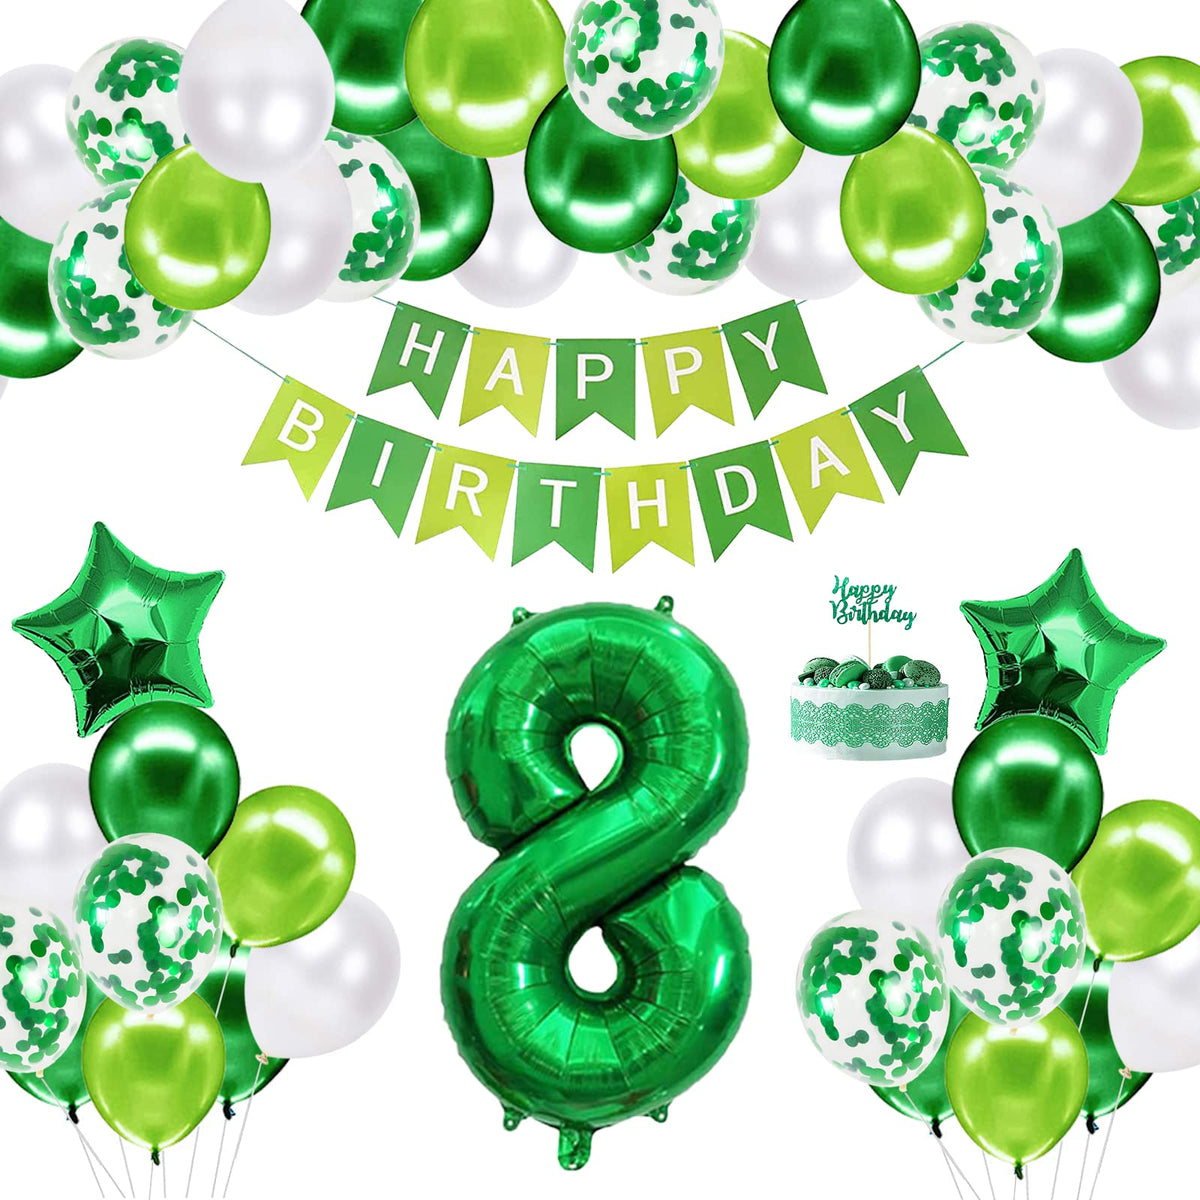 8th Birthday Decorations Happy Birthday Balloon Set, Age 8 Birthday Party Supplies With Happy Birthday Banner & Star Foil Balloon For Baby Showers Birthday Decor